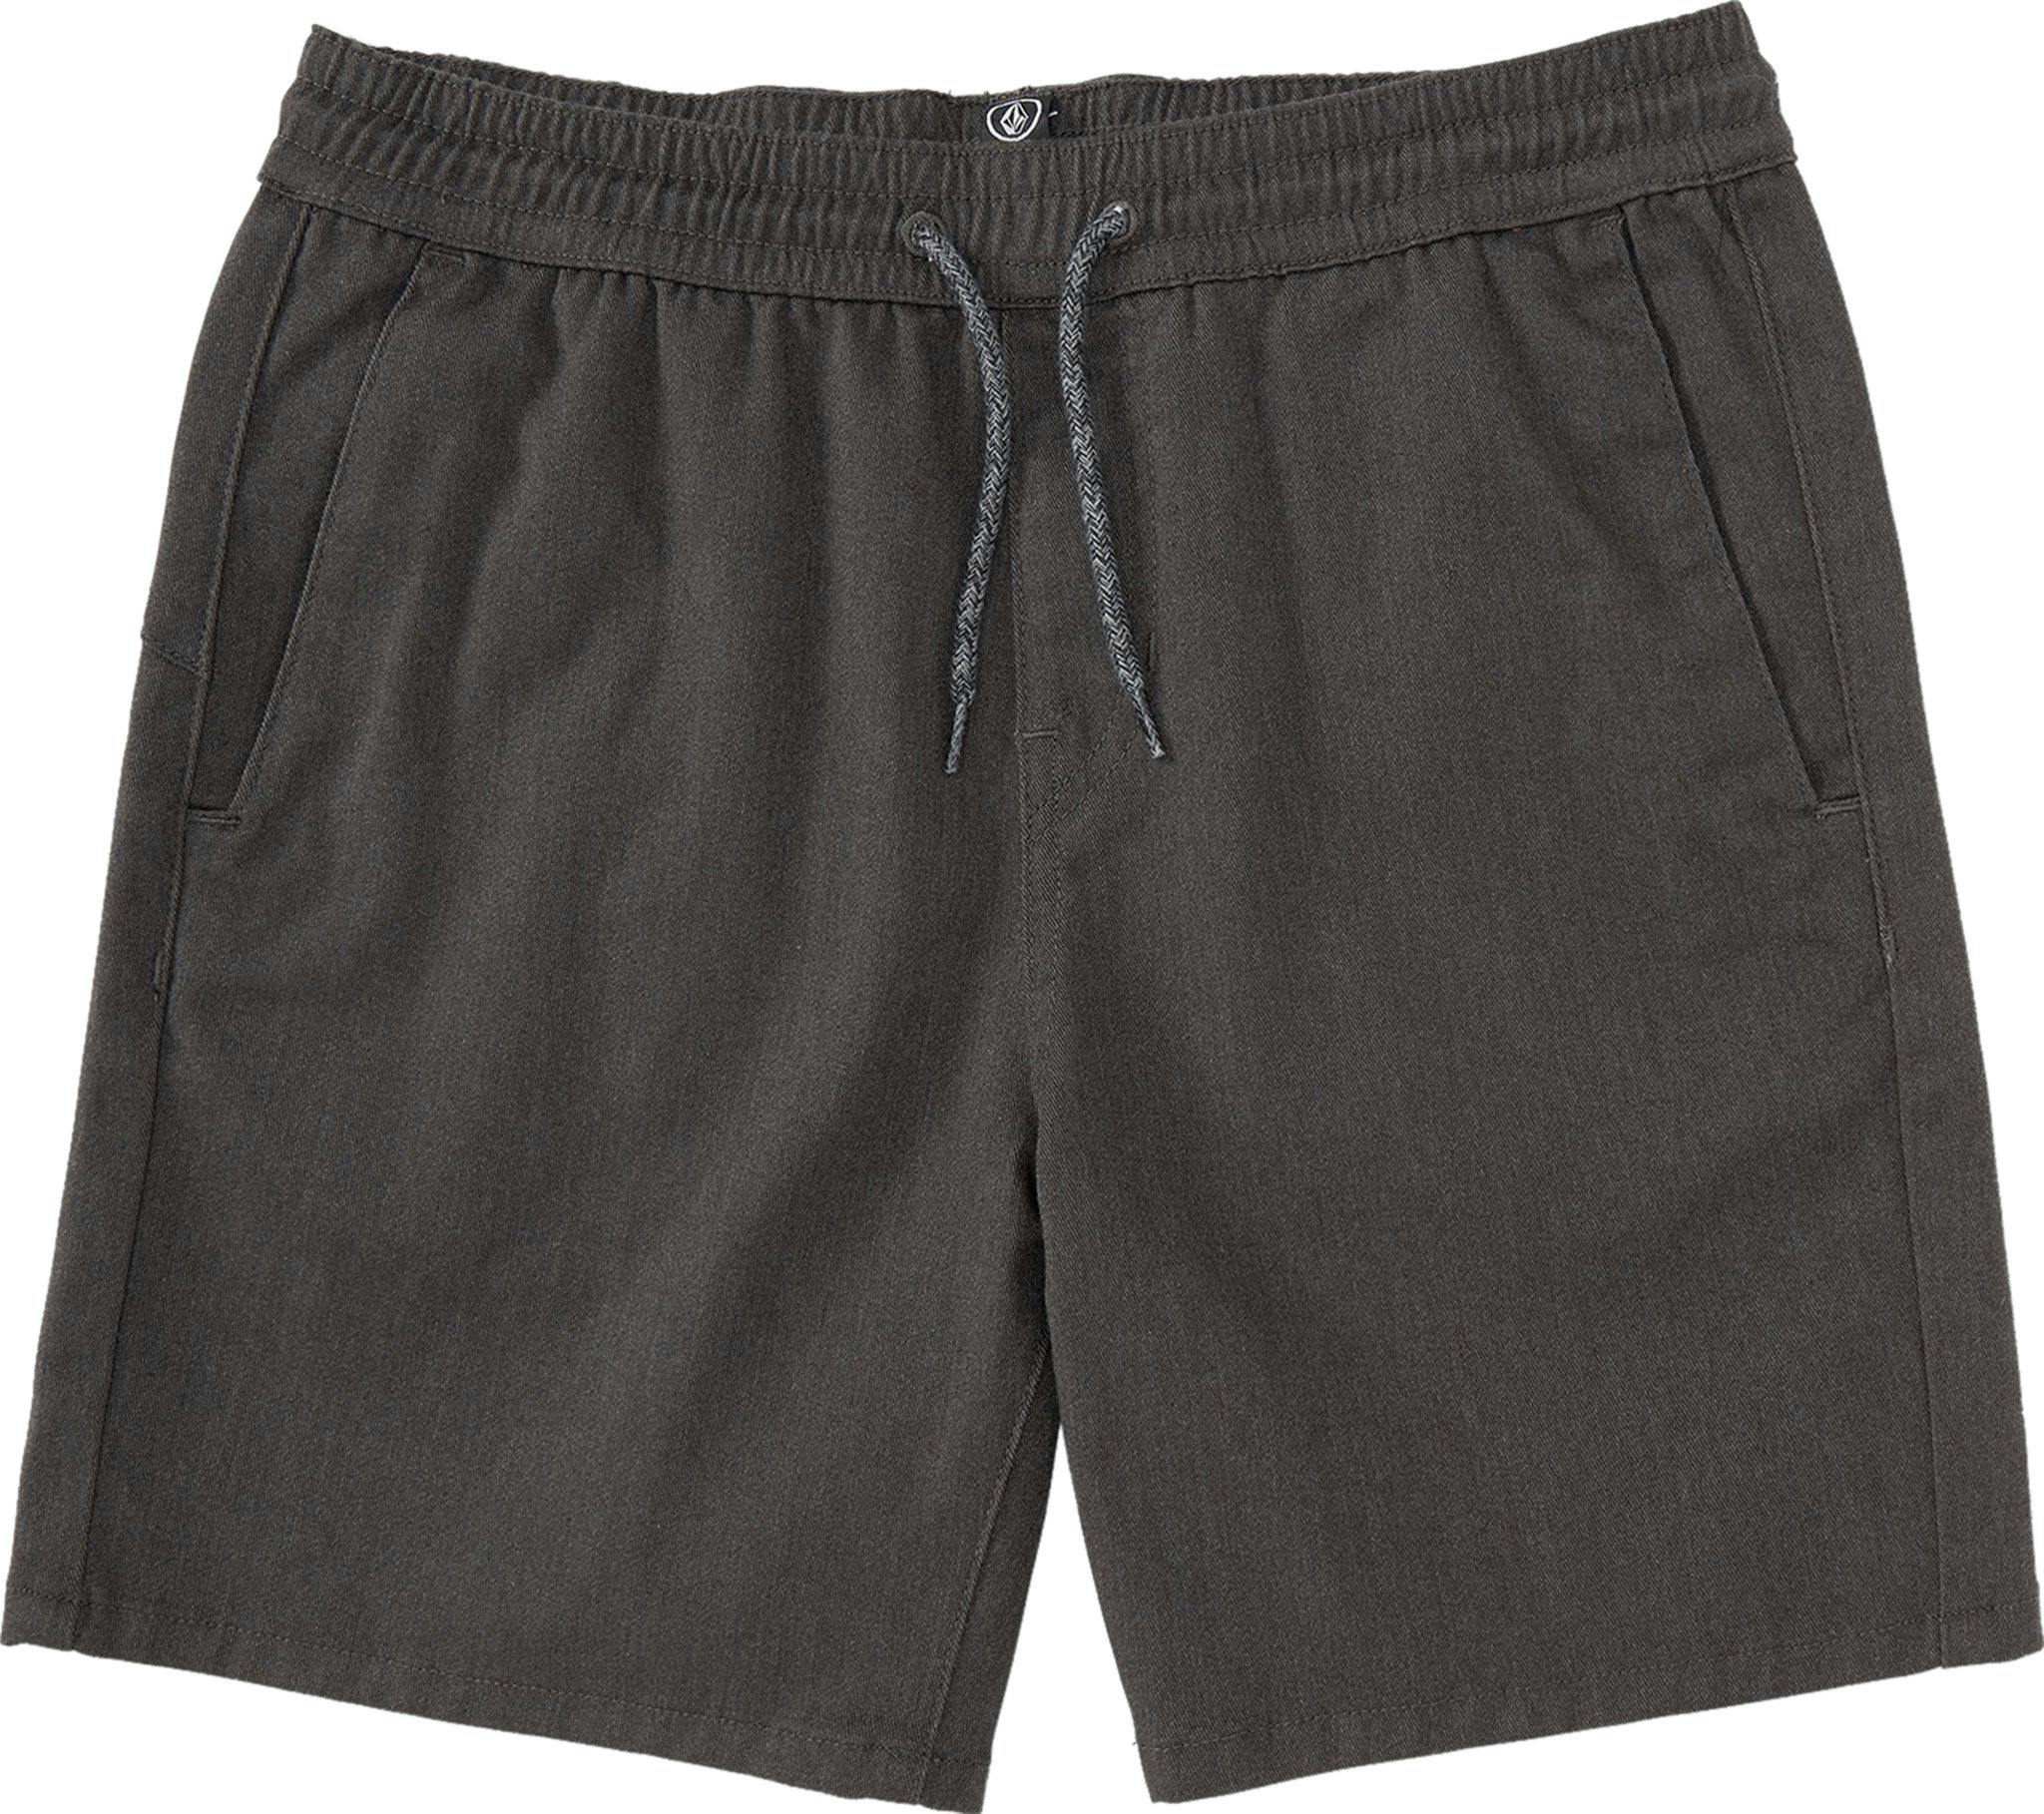 Product image for Frickin 15 In Elastic Shorts - Big Boys